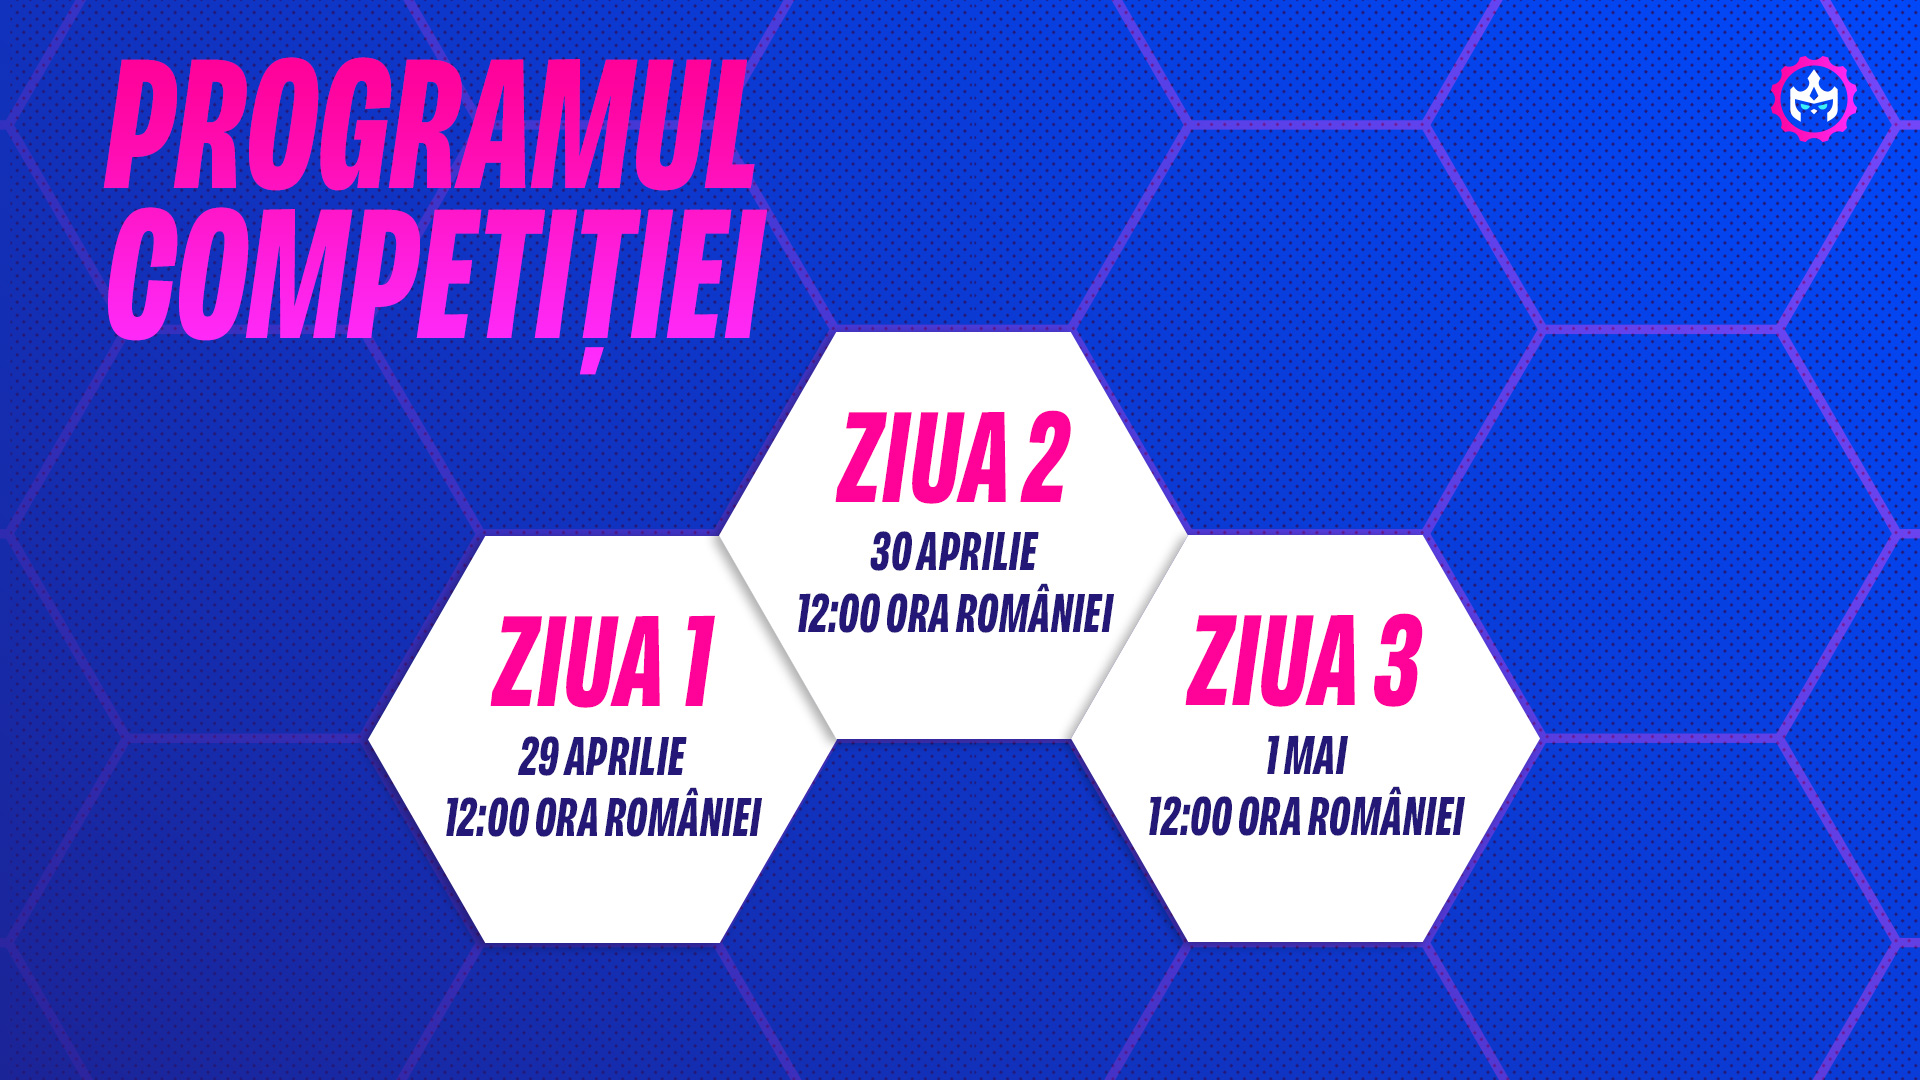 Competition_Schedule_Graphic_RO.jpg